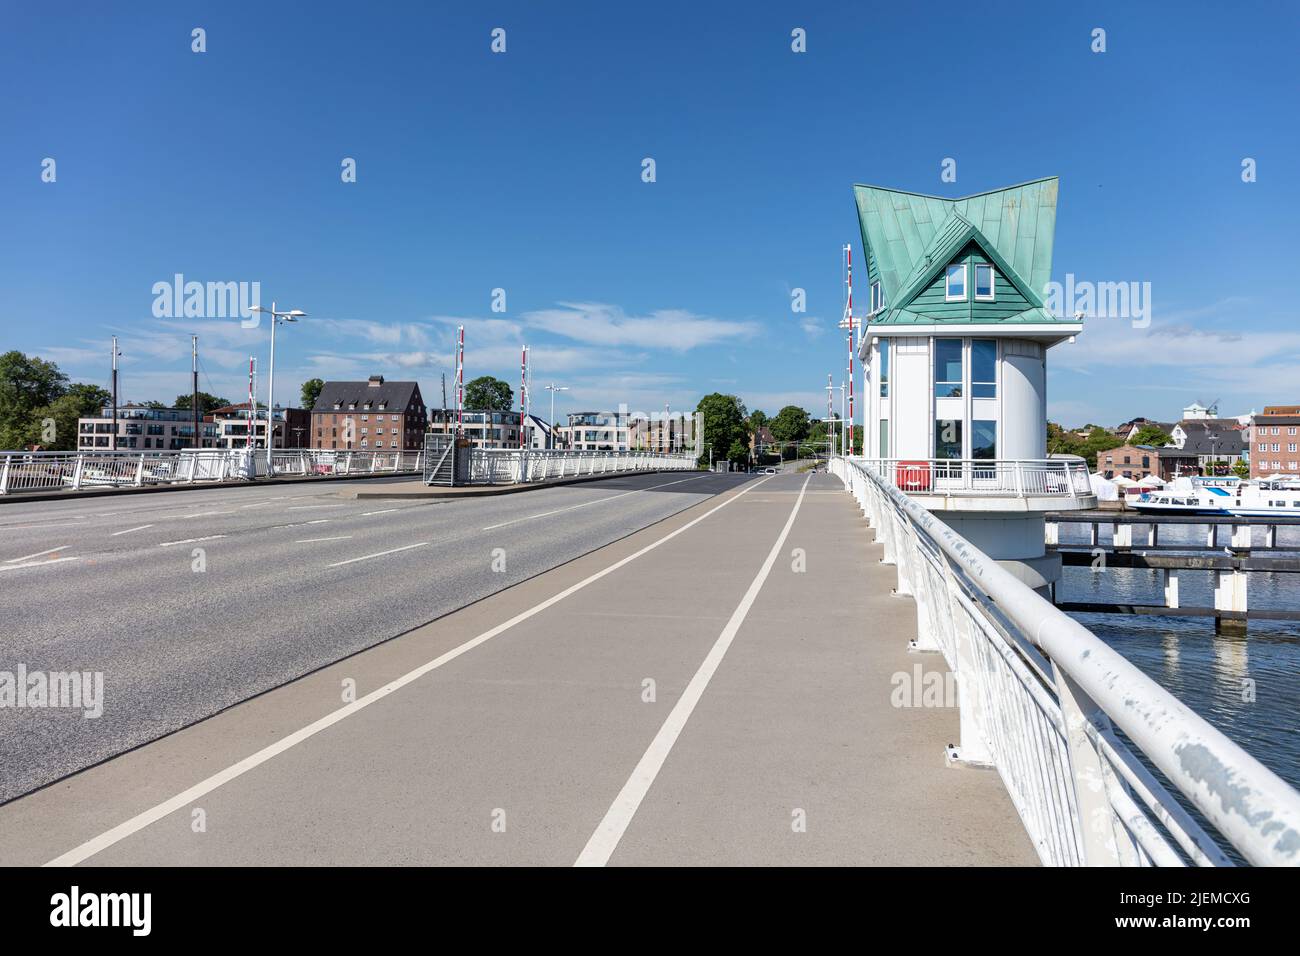 bascule bridge over the river Schlei in Kappeln, Germany Stock Photo